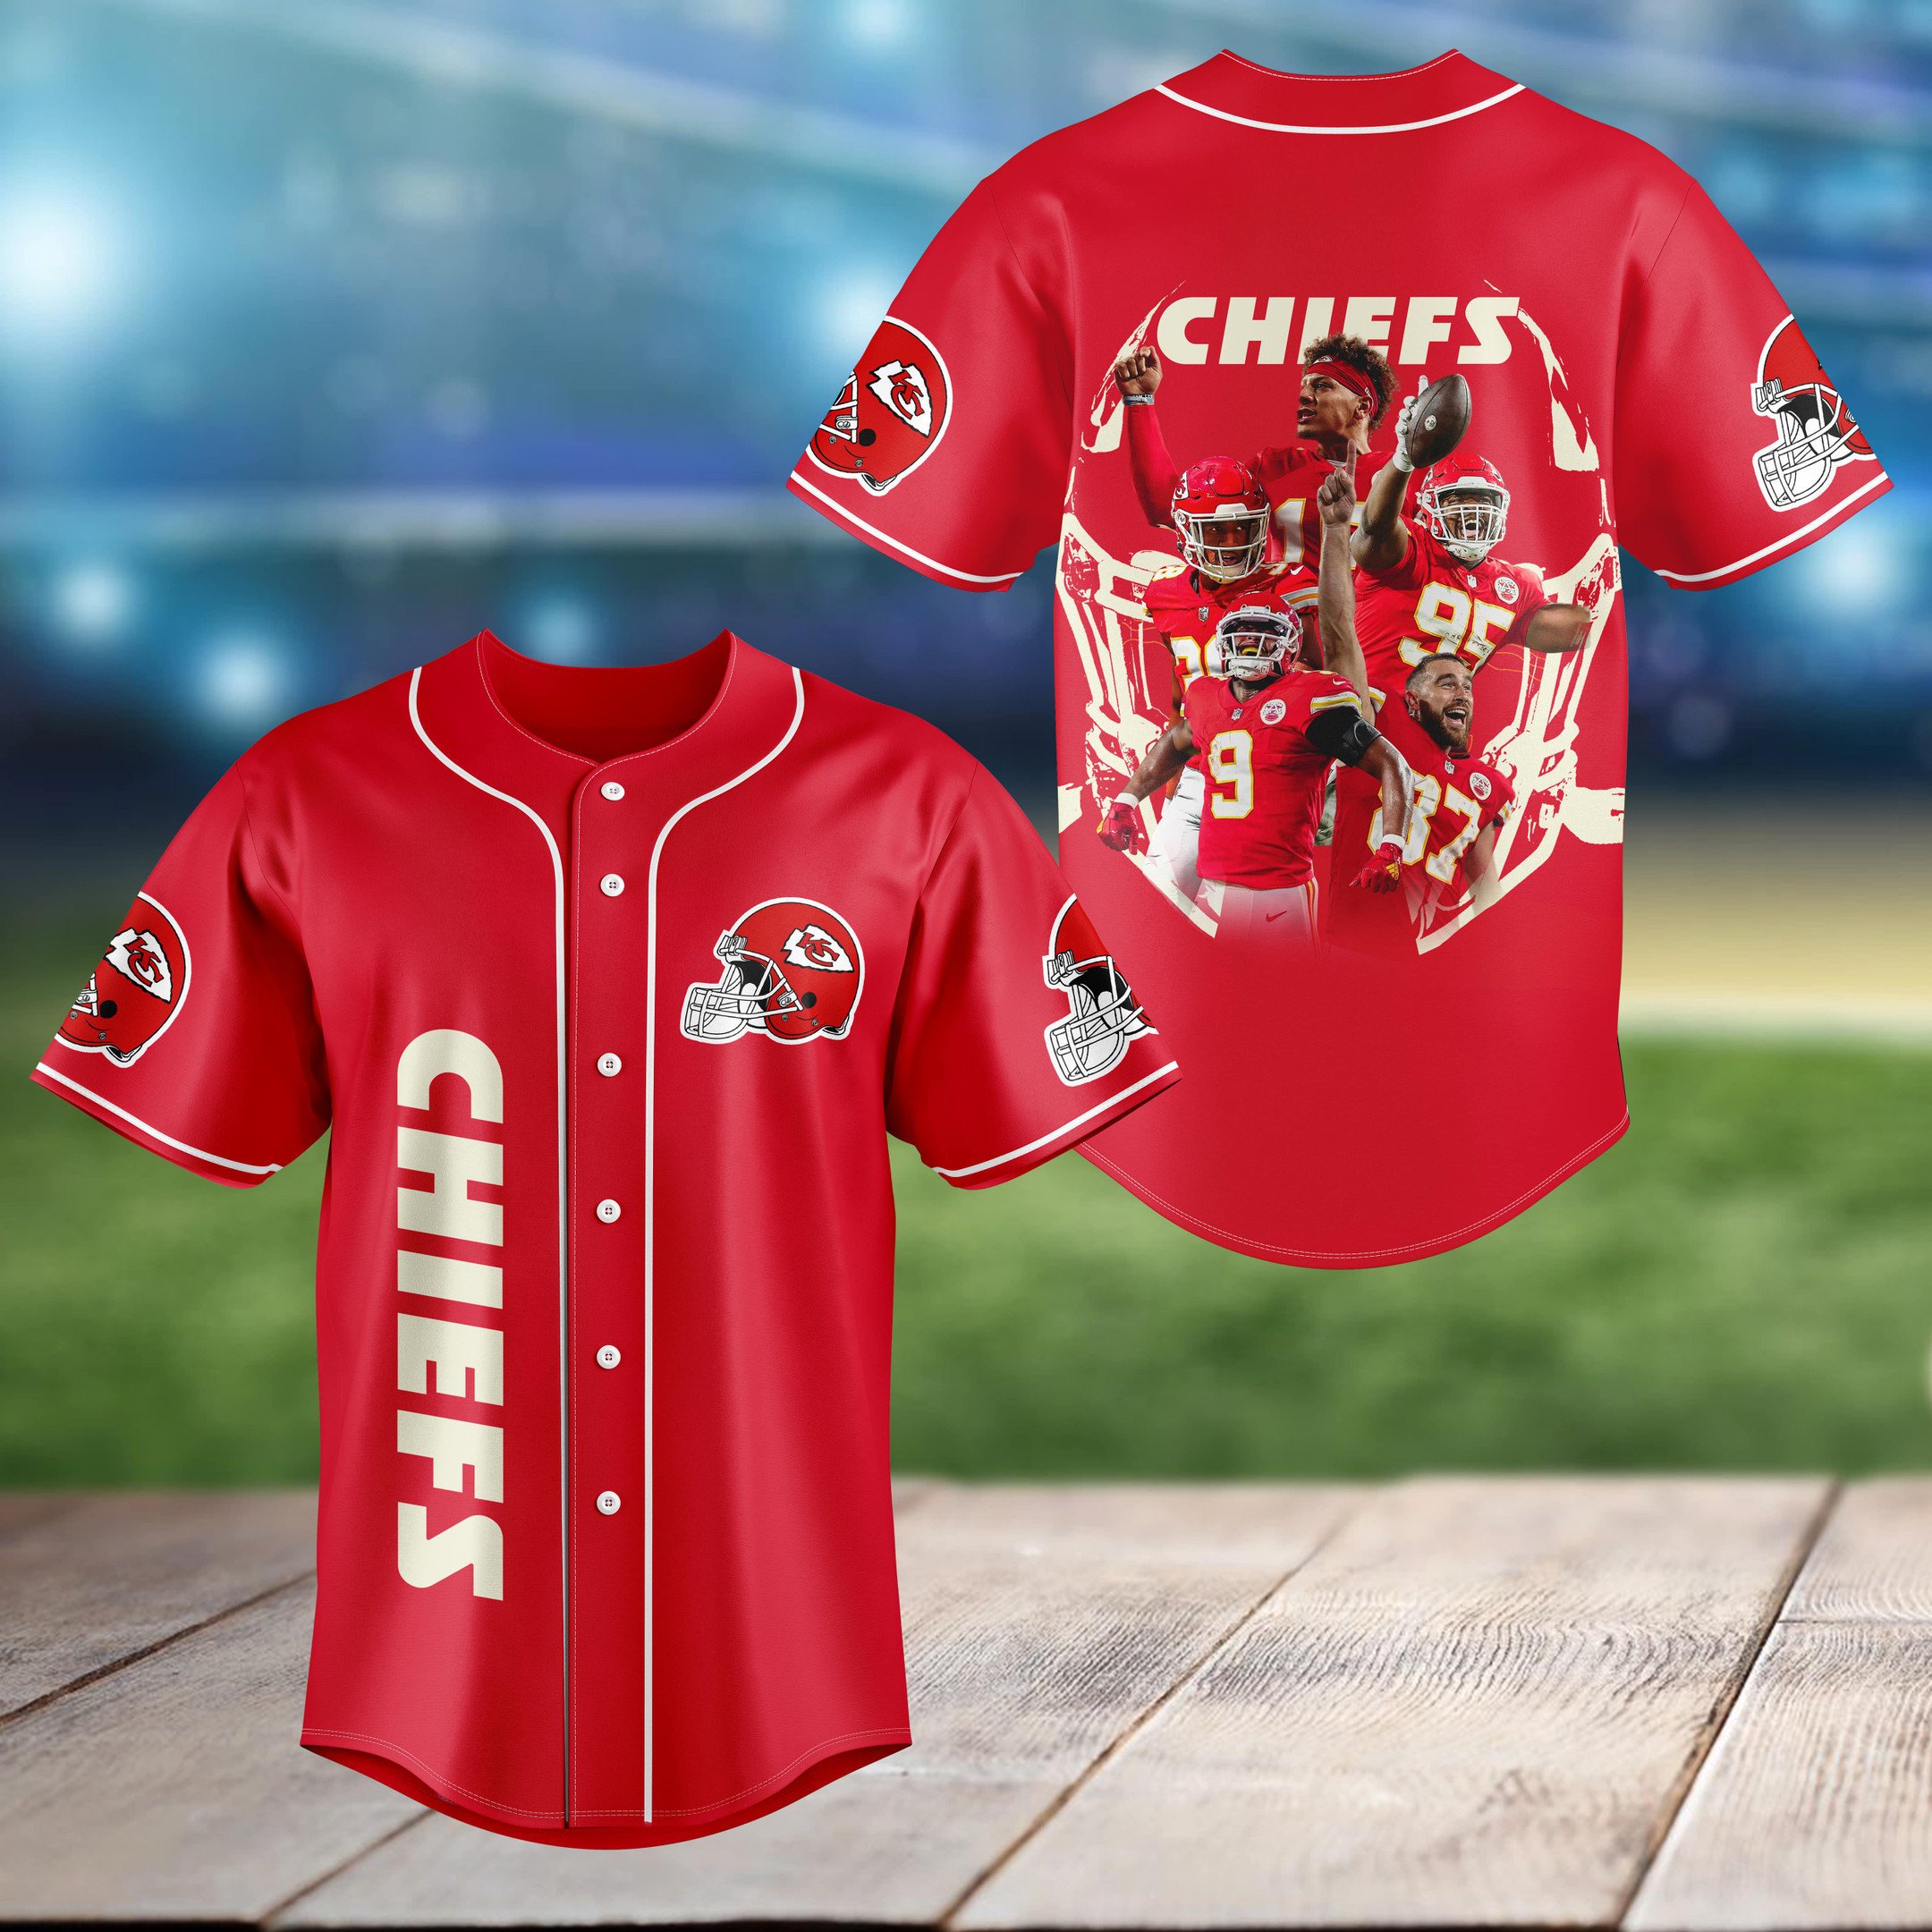 chiefs red jersey